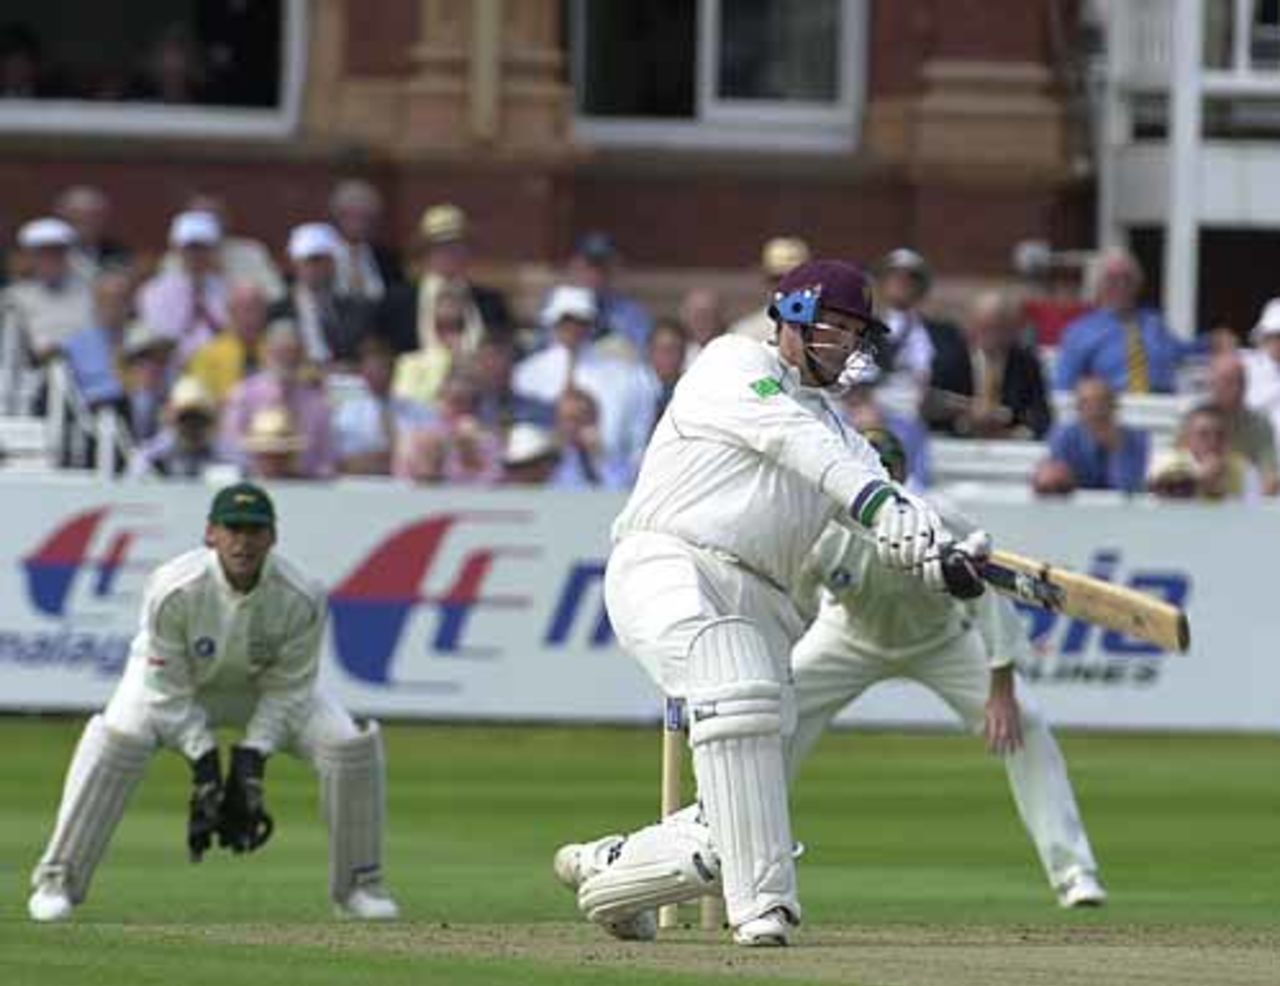 Marcus Trescothick crashes a four through the covers in his innings of 18, C&G Trophy final, Lord's, Sat 1 Sep 2001